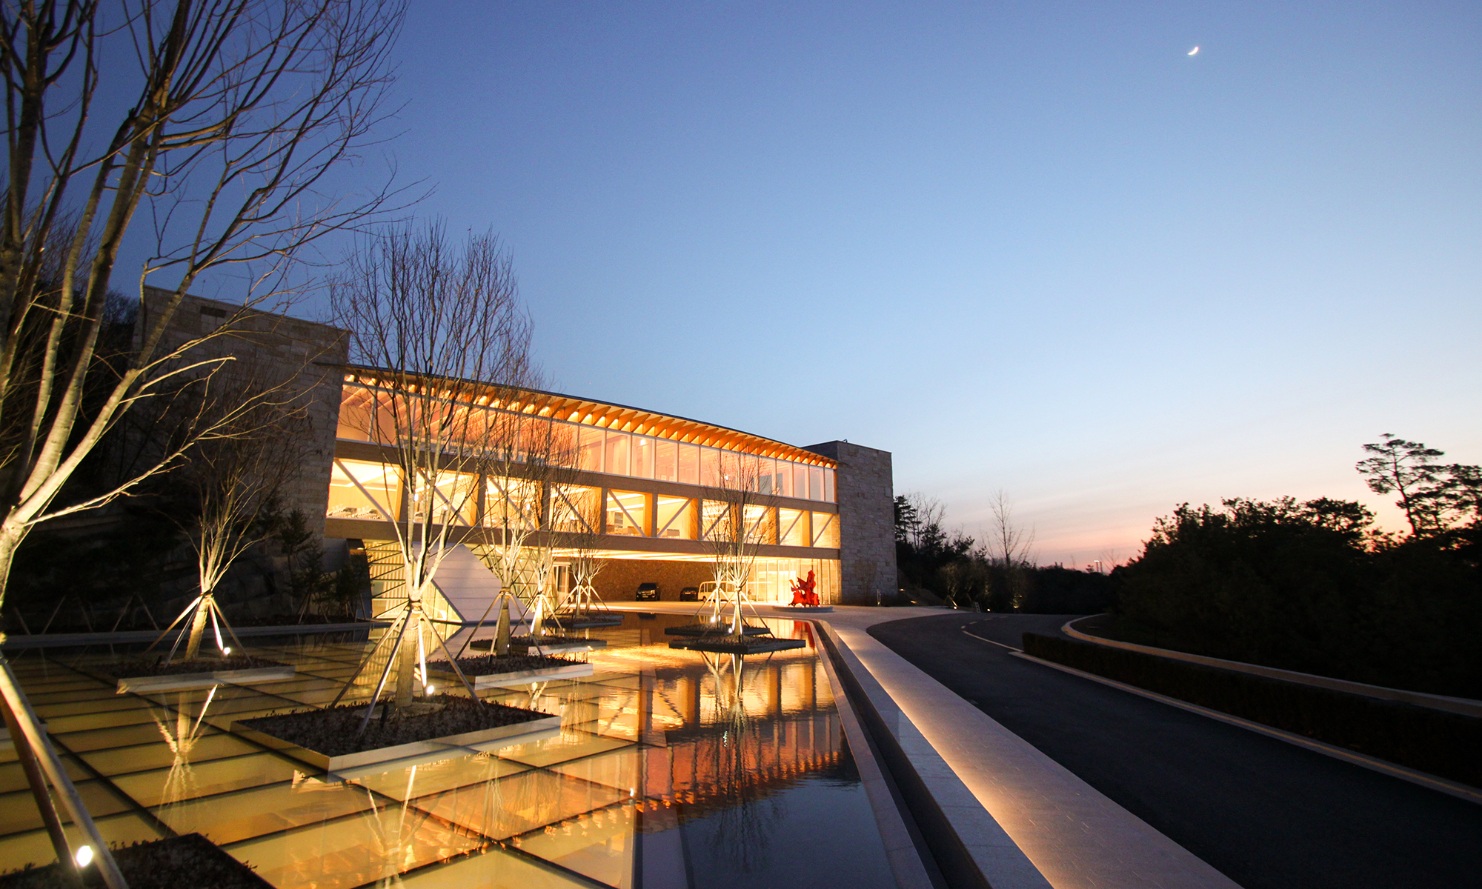 External photograph of the Haesley Nine Bridges Golf Resort Learning Centre. Illuminated timber architecture at night, with the pool in the foreground.<br/>